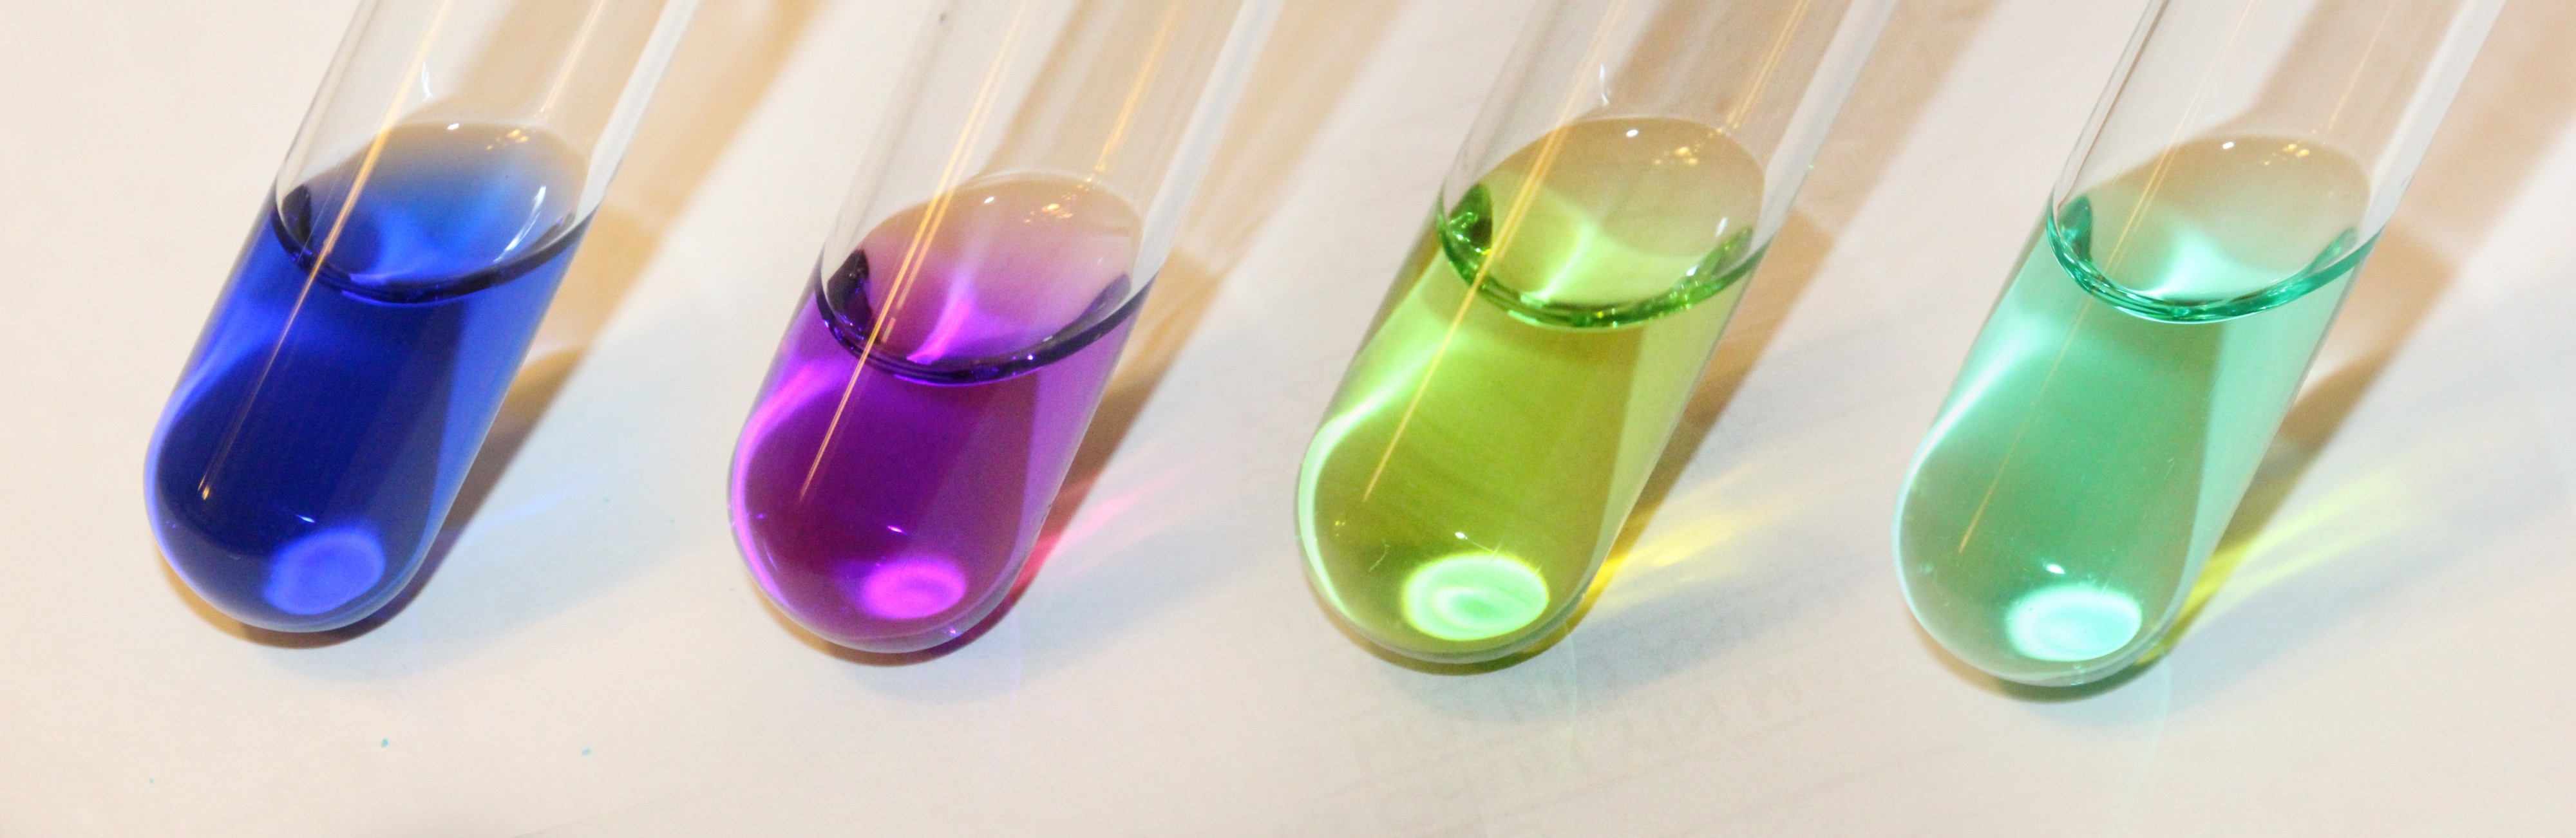 Color of various Ni(II) complexes in aqueous solution